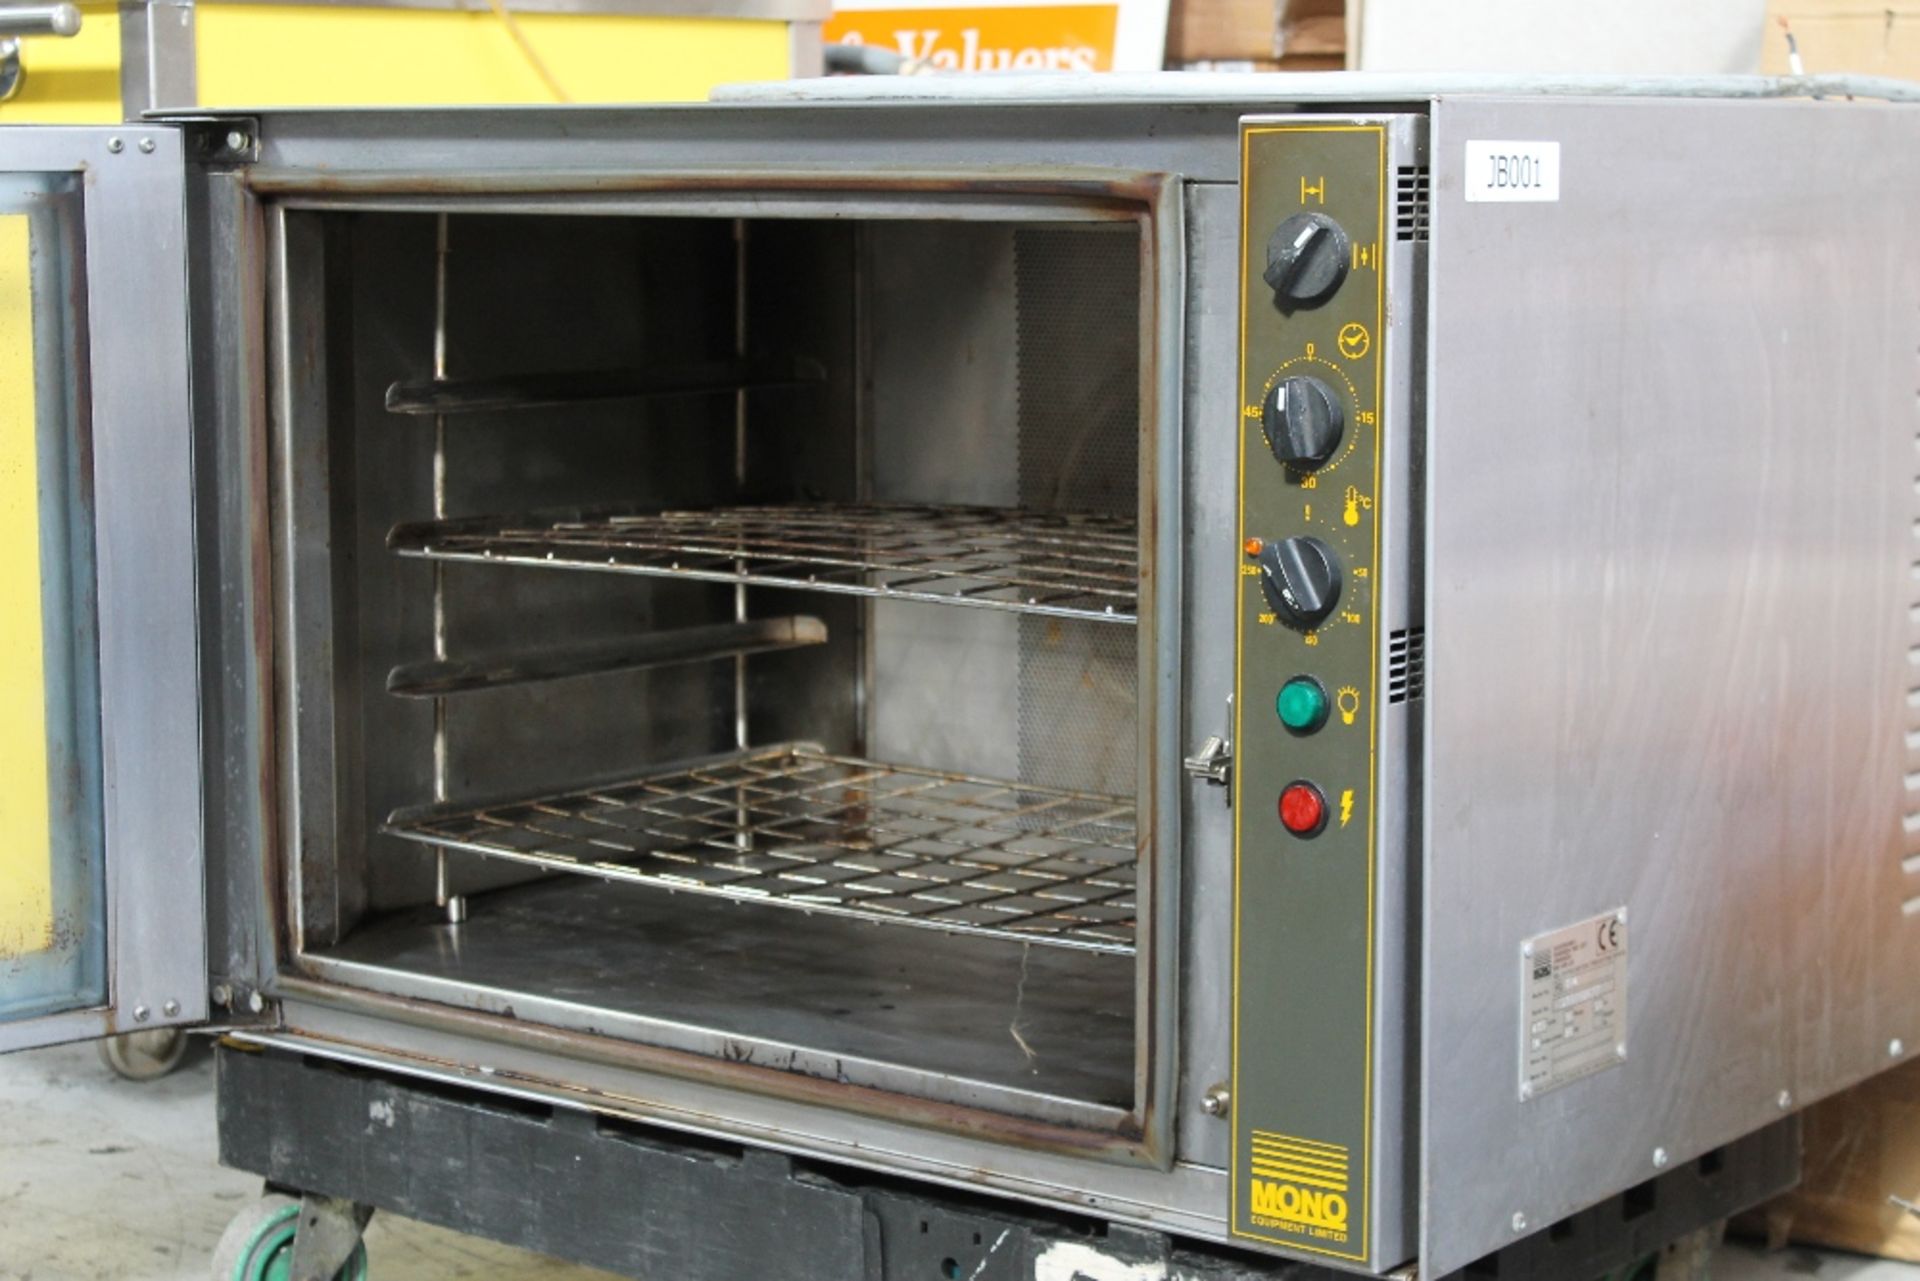 Mono Commercial Bake Off Oven – 3-ph electric – Tested – NO VAT - Image 2 of 4